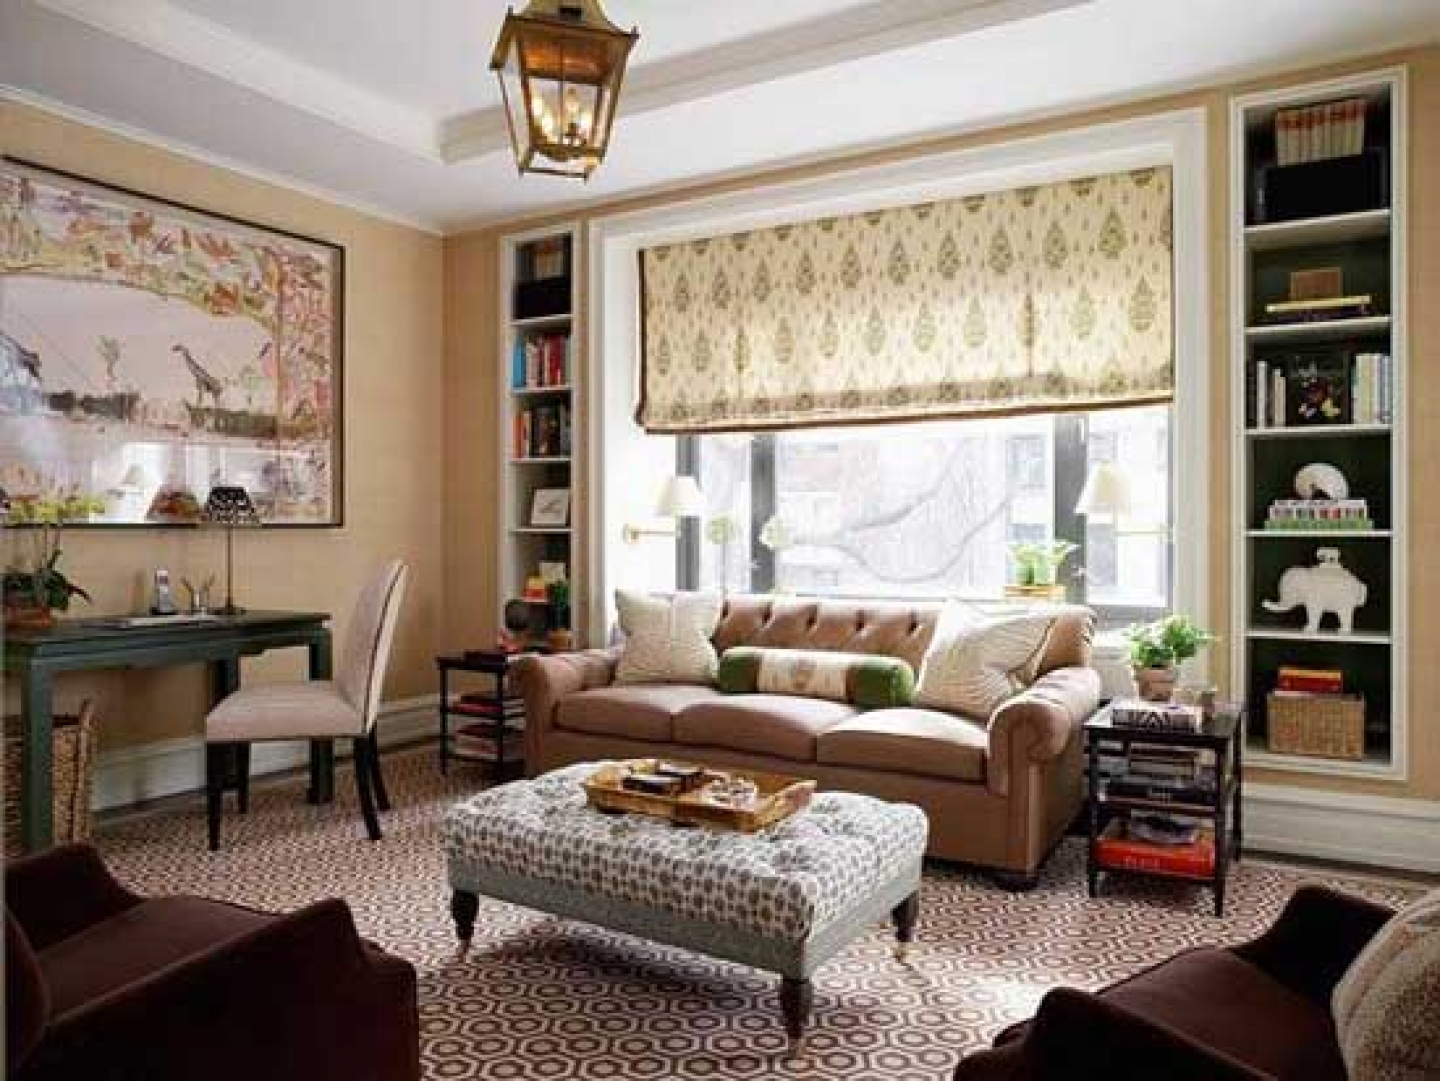 Best Living Room Decorating Ideas: Create The Perfect Space For Relaxation And Entertaining